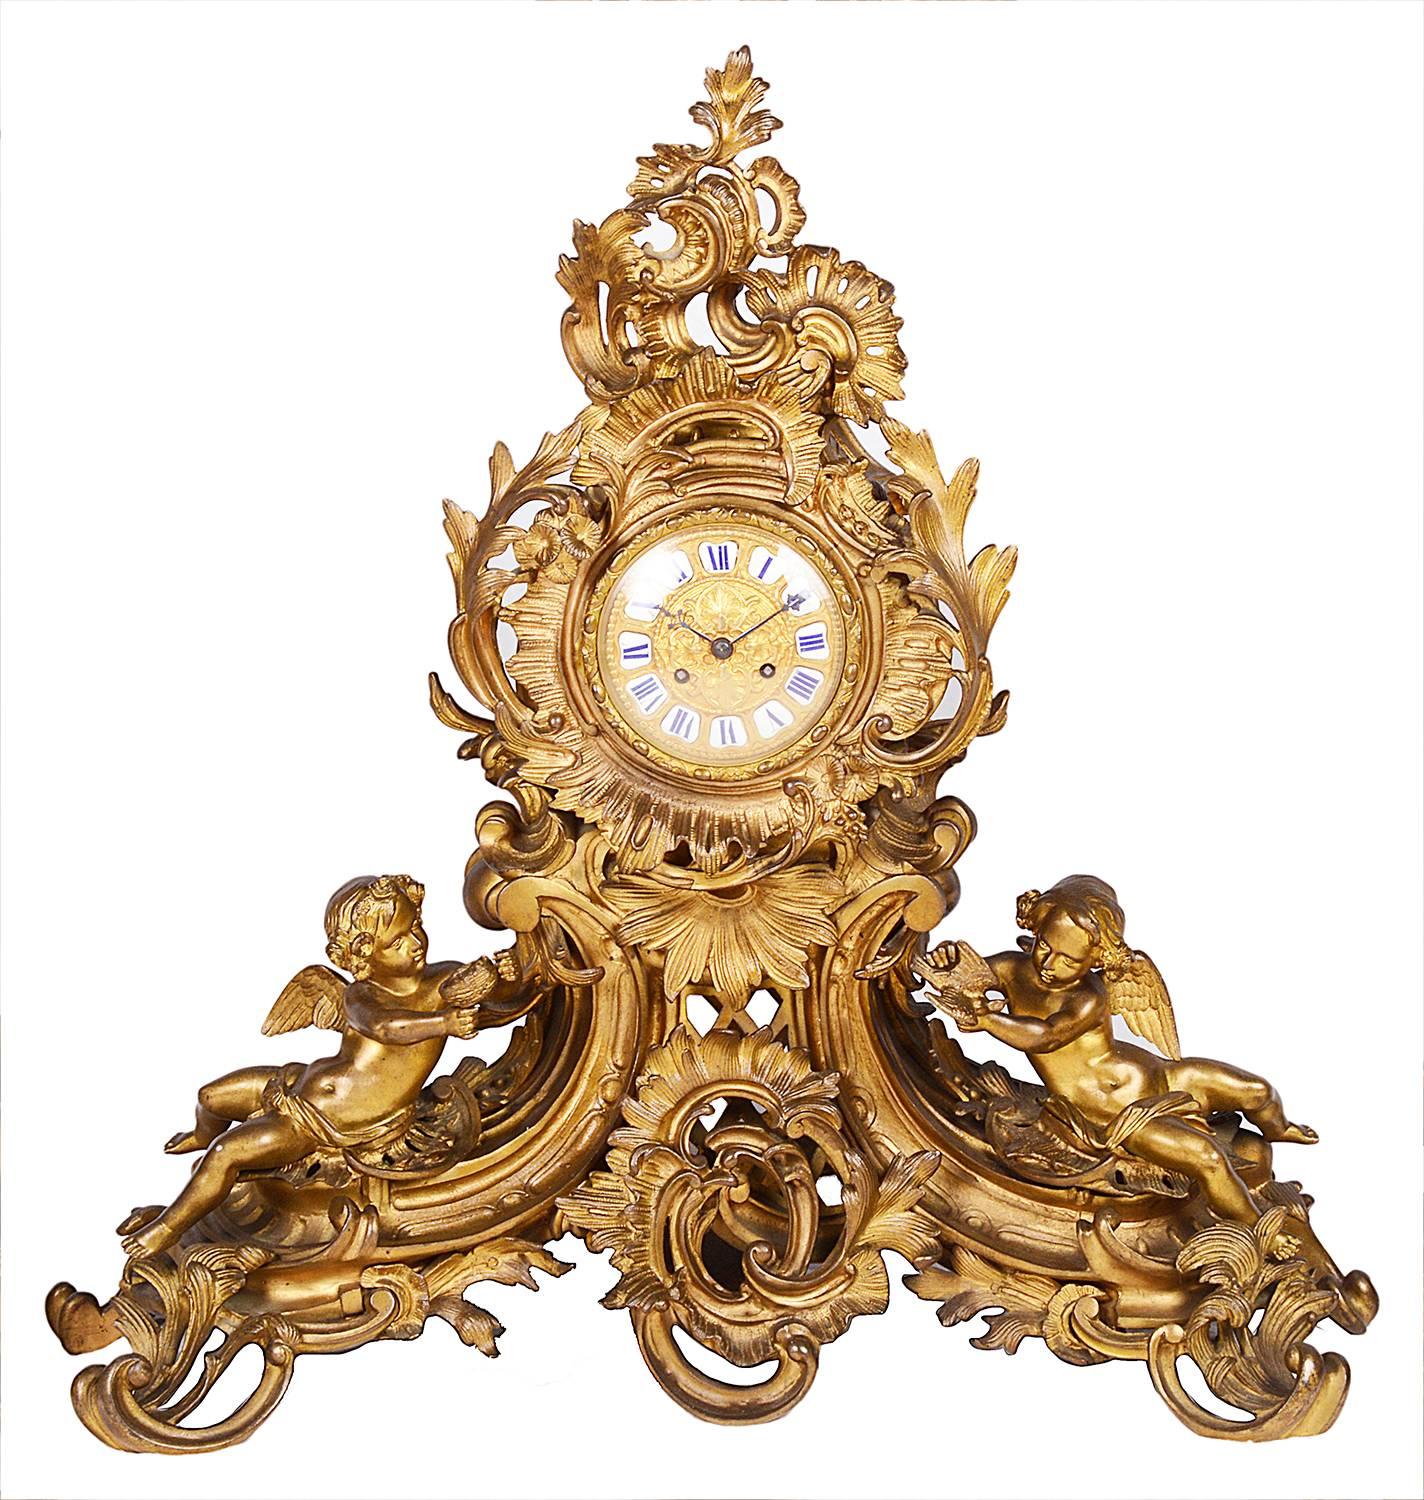 A large and impressive, 19th century gilded ormolu Louis XVI style clock garniture. Having scrolling foliate decoration with cherubs supporting the eight branch candelabra and either side of the clock. The clock having an eight day duration,